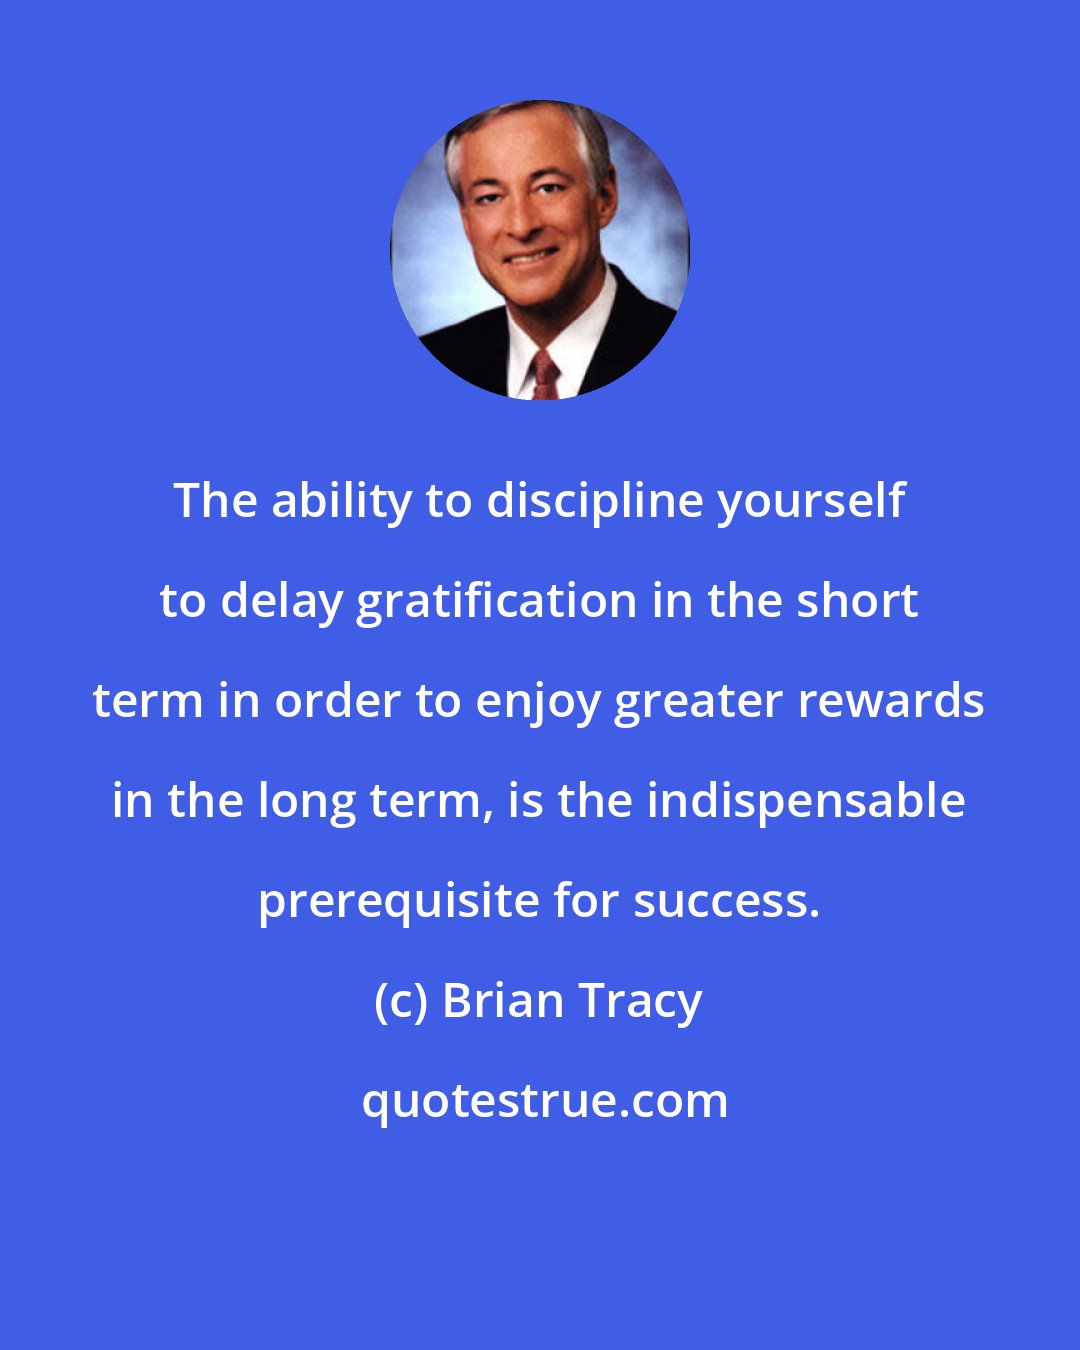 Brian Tracy: The ability to discipline yourself to delay gratification in the short term in order to enjoy greater rewards in the long term, is the indispensable prerequisite for success.